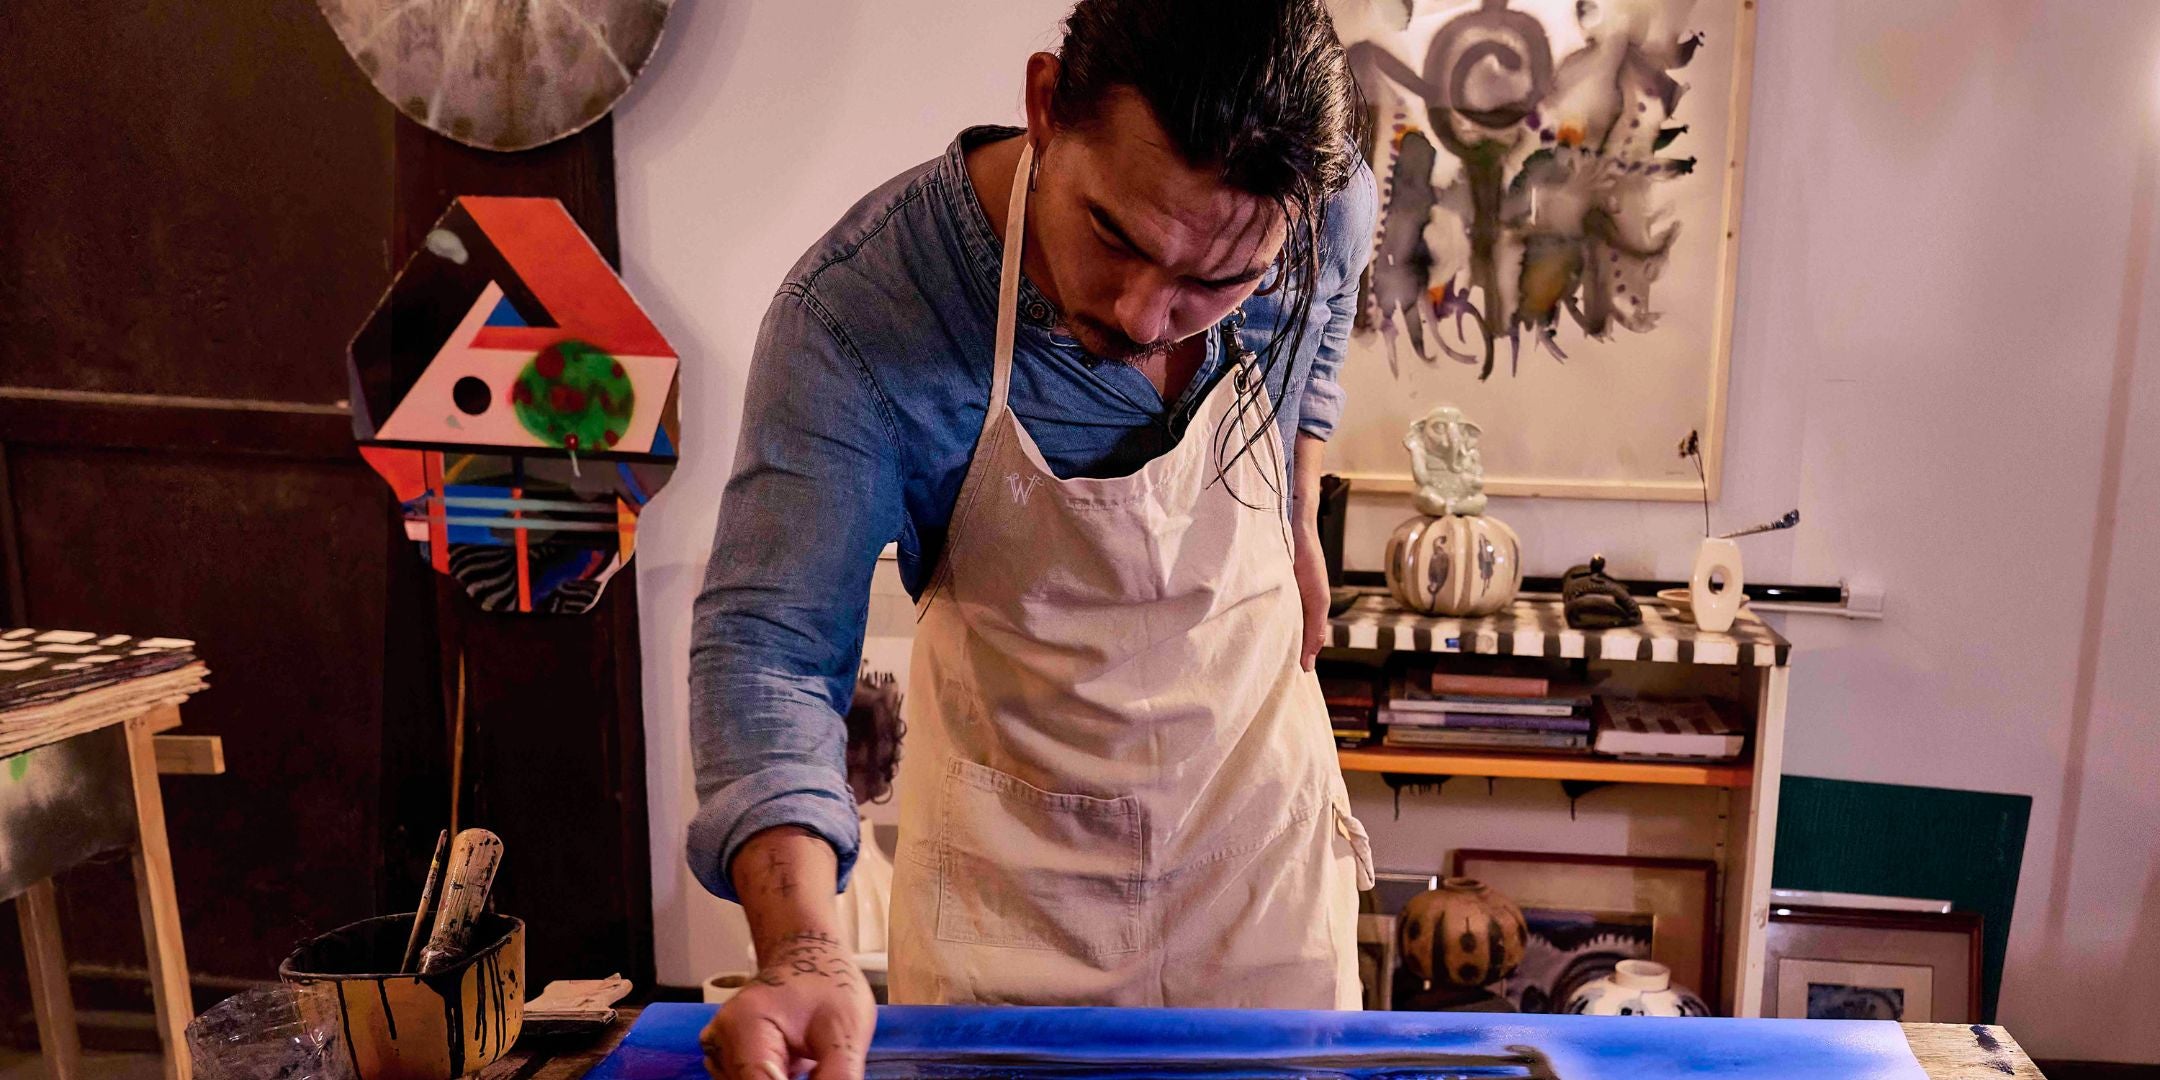 Man in an art studio painting wearing a wiseguy original creme colored canvas apron he is painting with blue and black ink